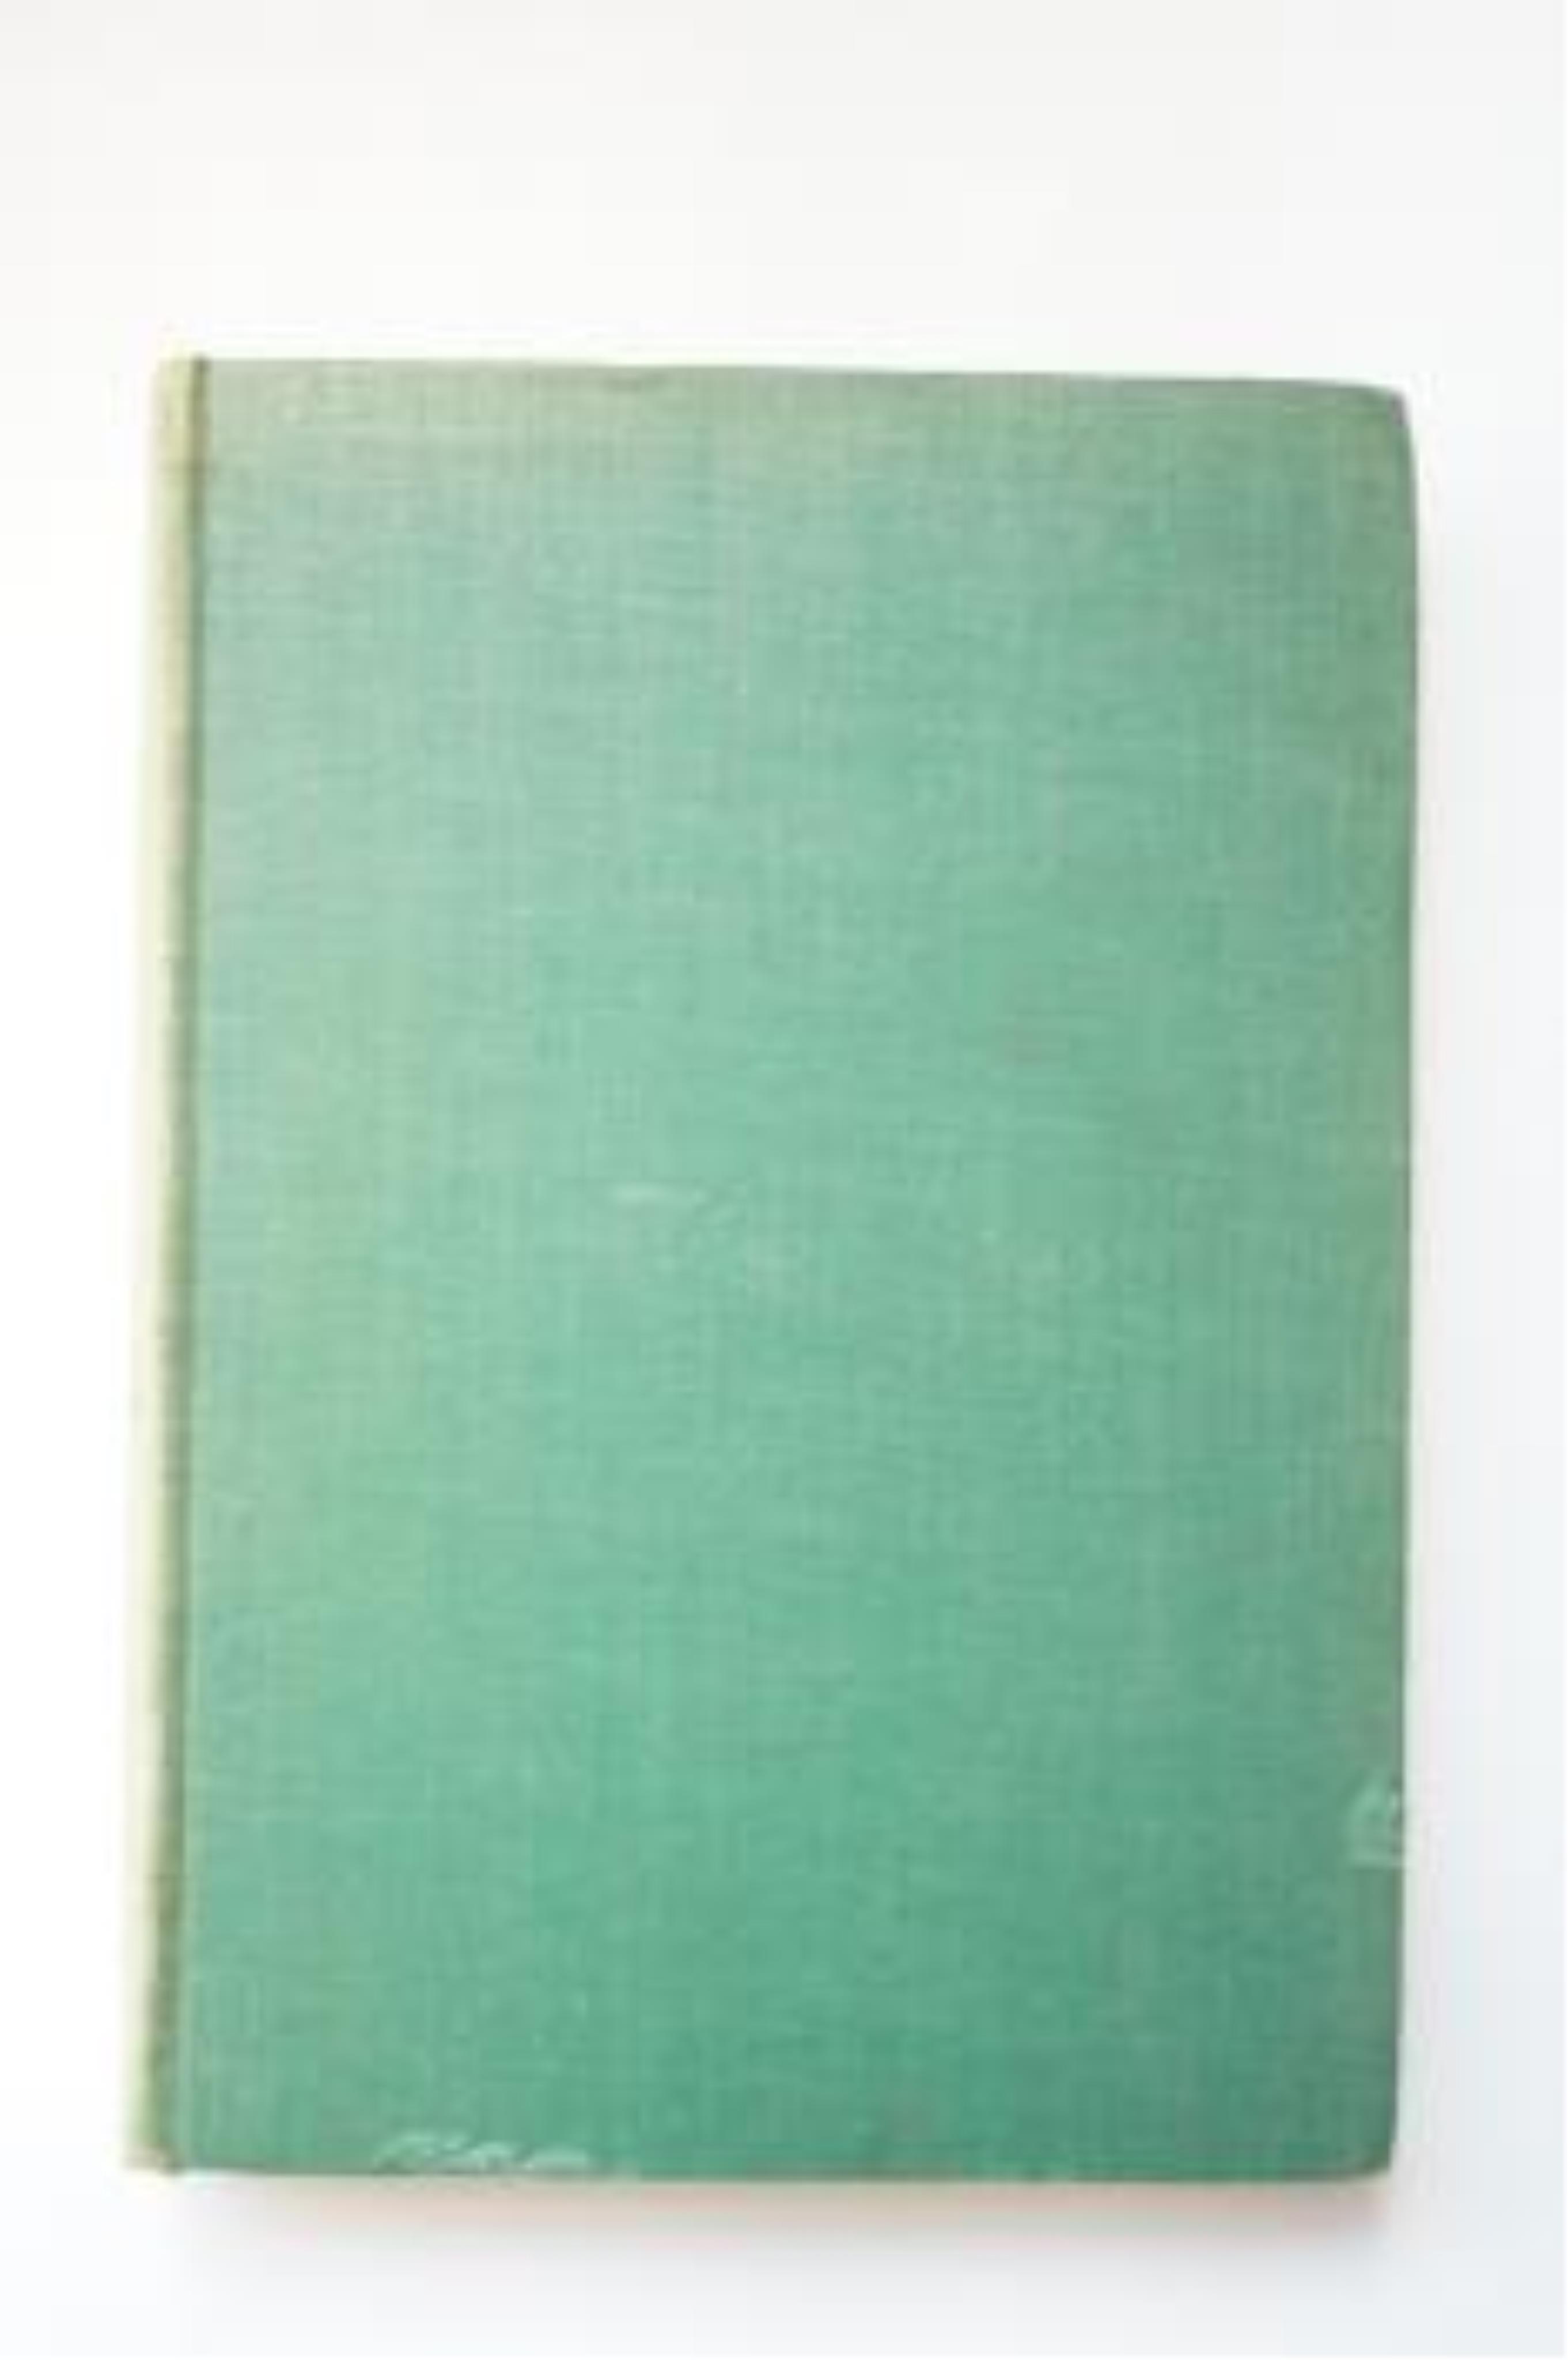 Byron, George Gordon Noel, Lord - The Genuine Rejected Address, presented to the Committee of Management for Drury-Lane Theatre, 1st (and only) edition, 8vo, original boards, lacks label to spine and half title, edges un